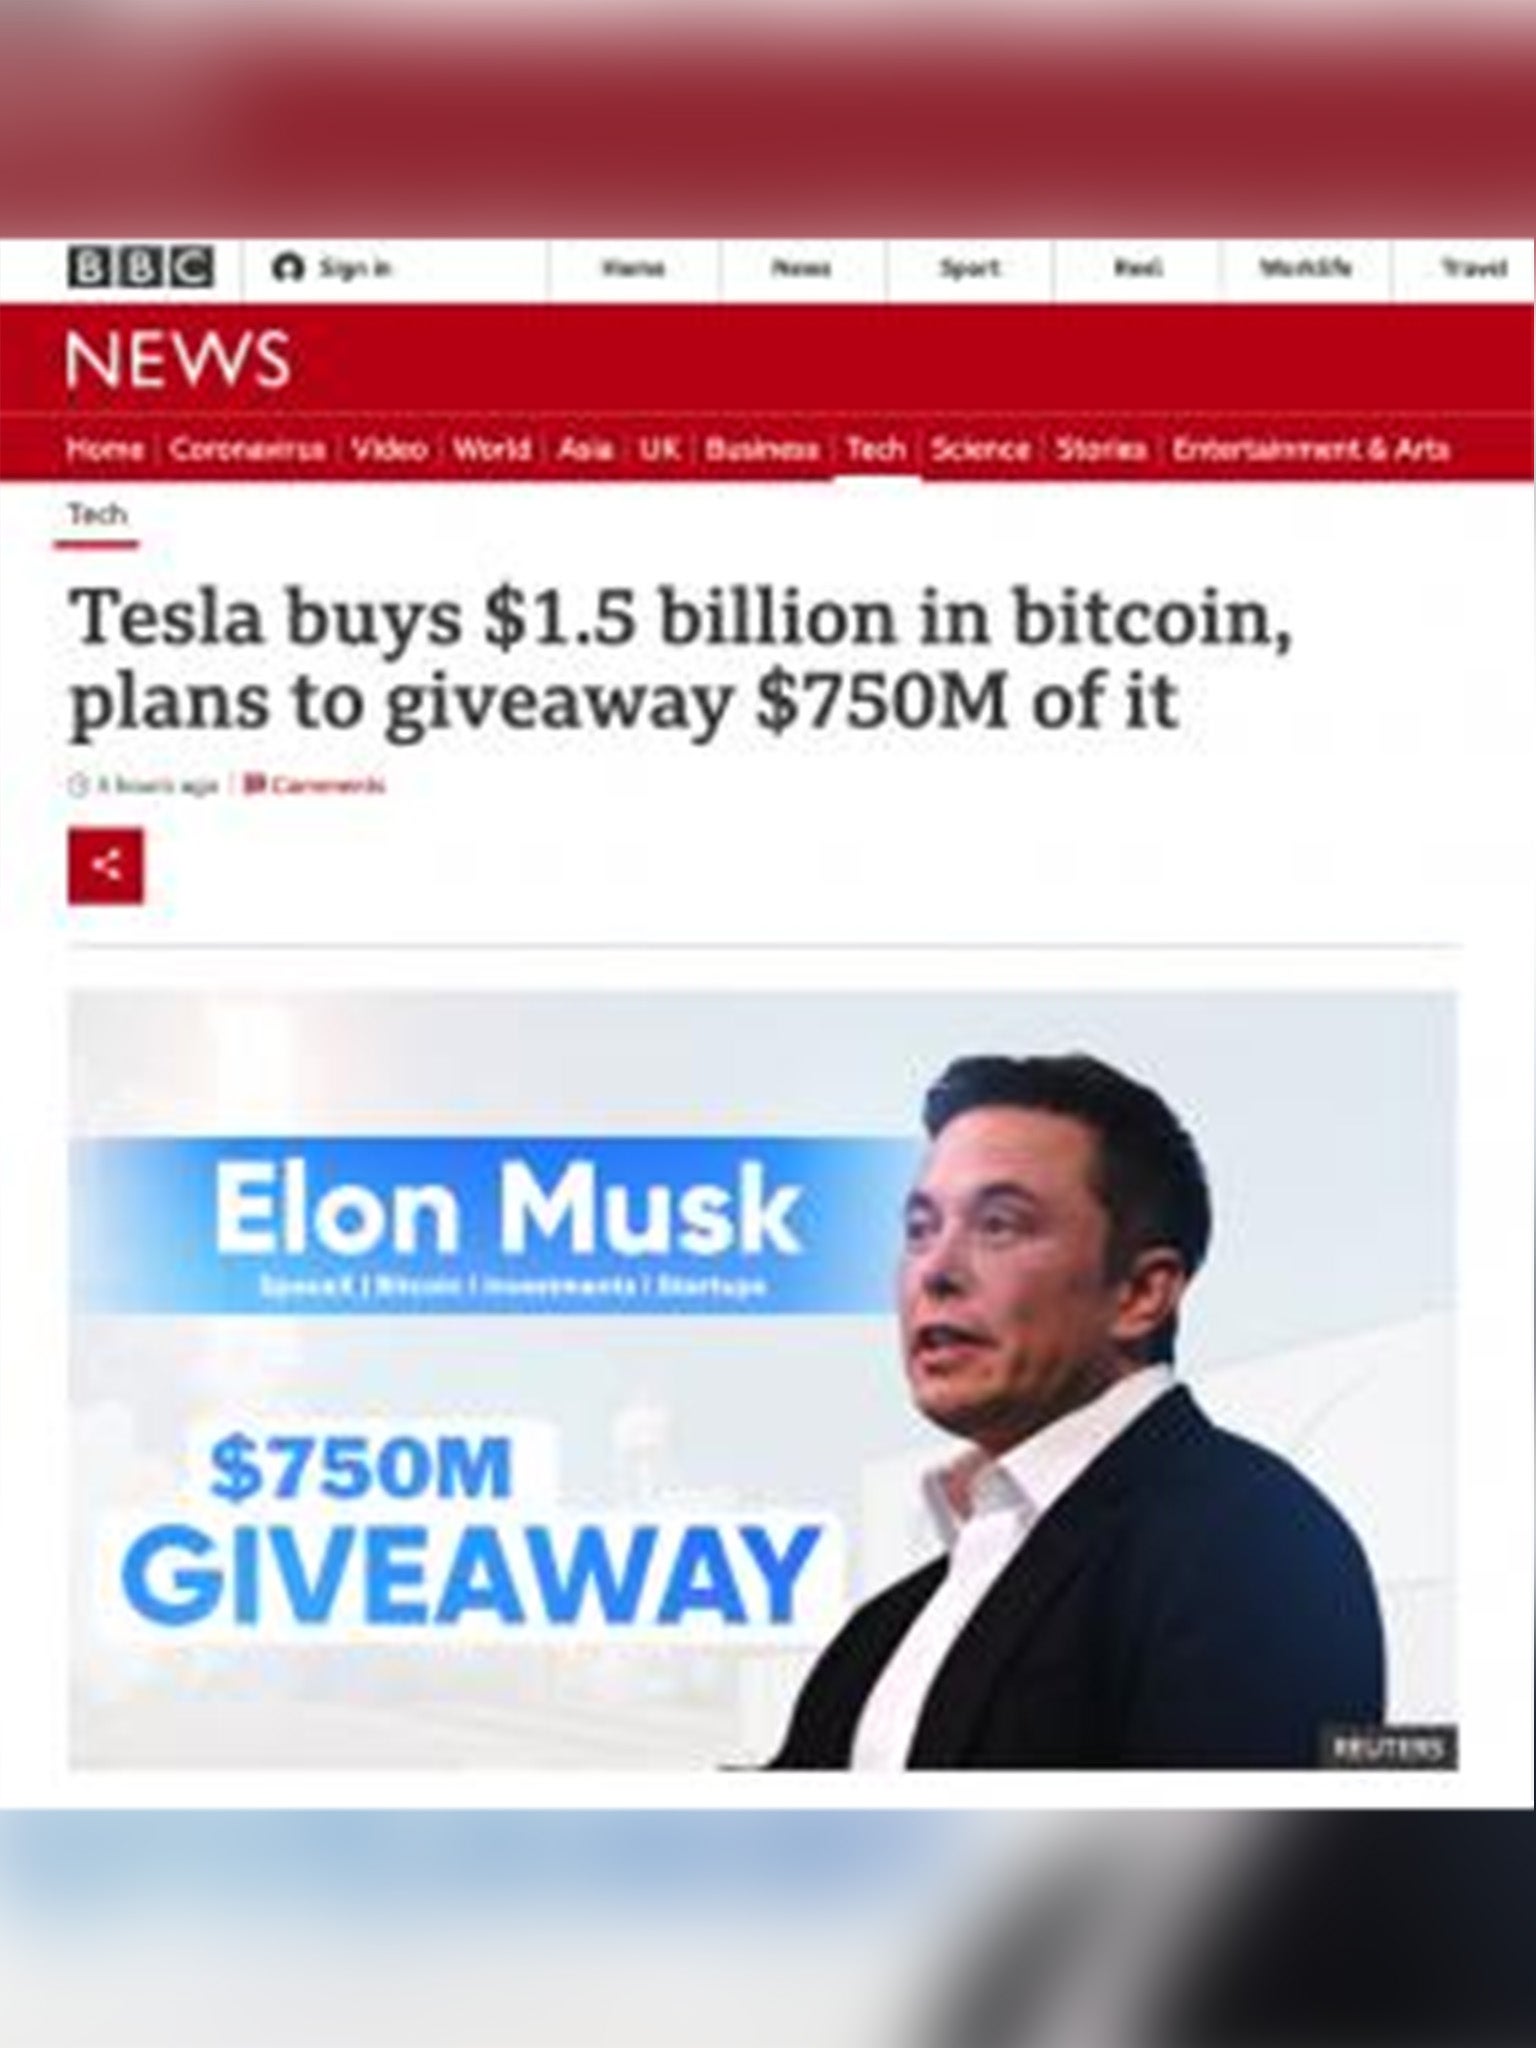 Musk’s image used to draw investors on mock-BBC News site